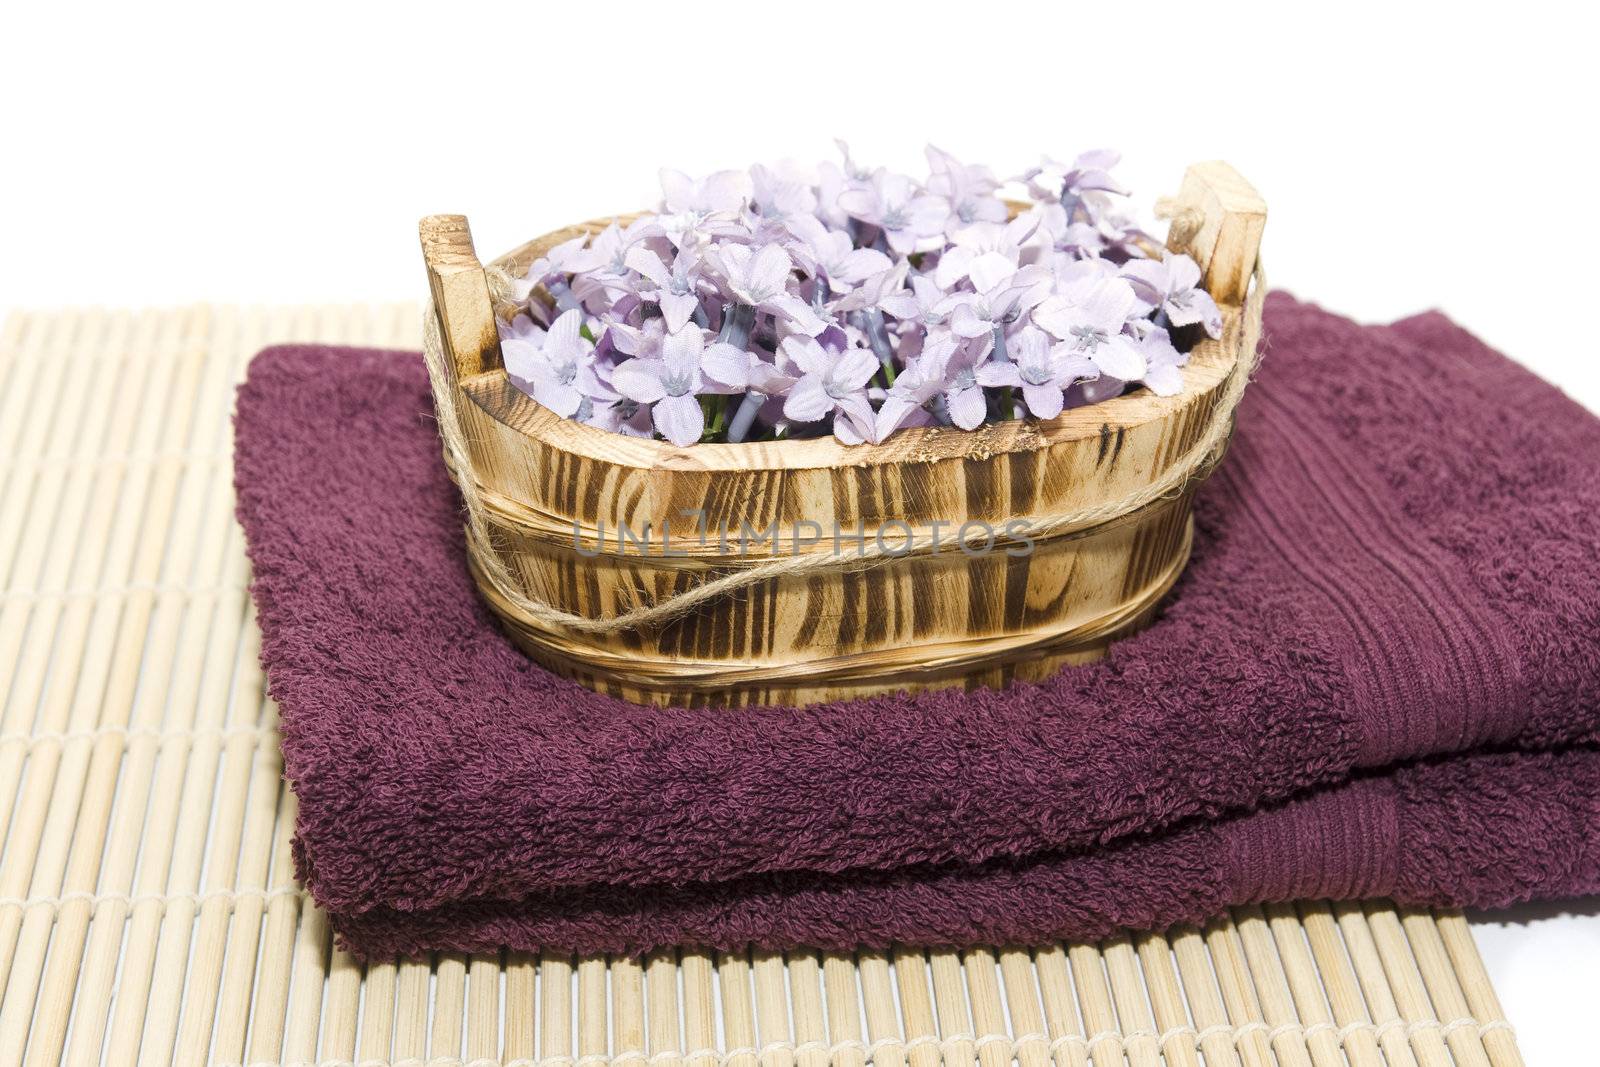 Scented Soap Flowers on Towels by newt96